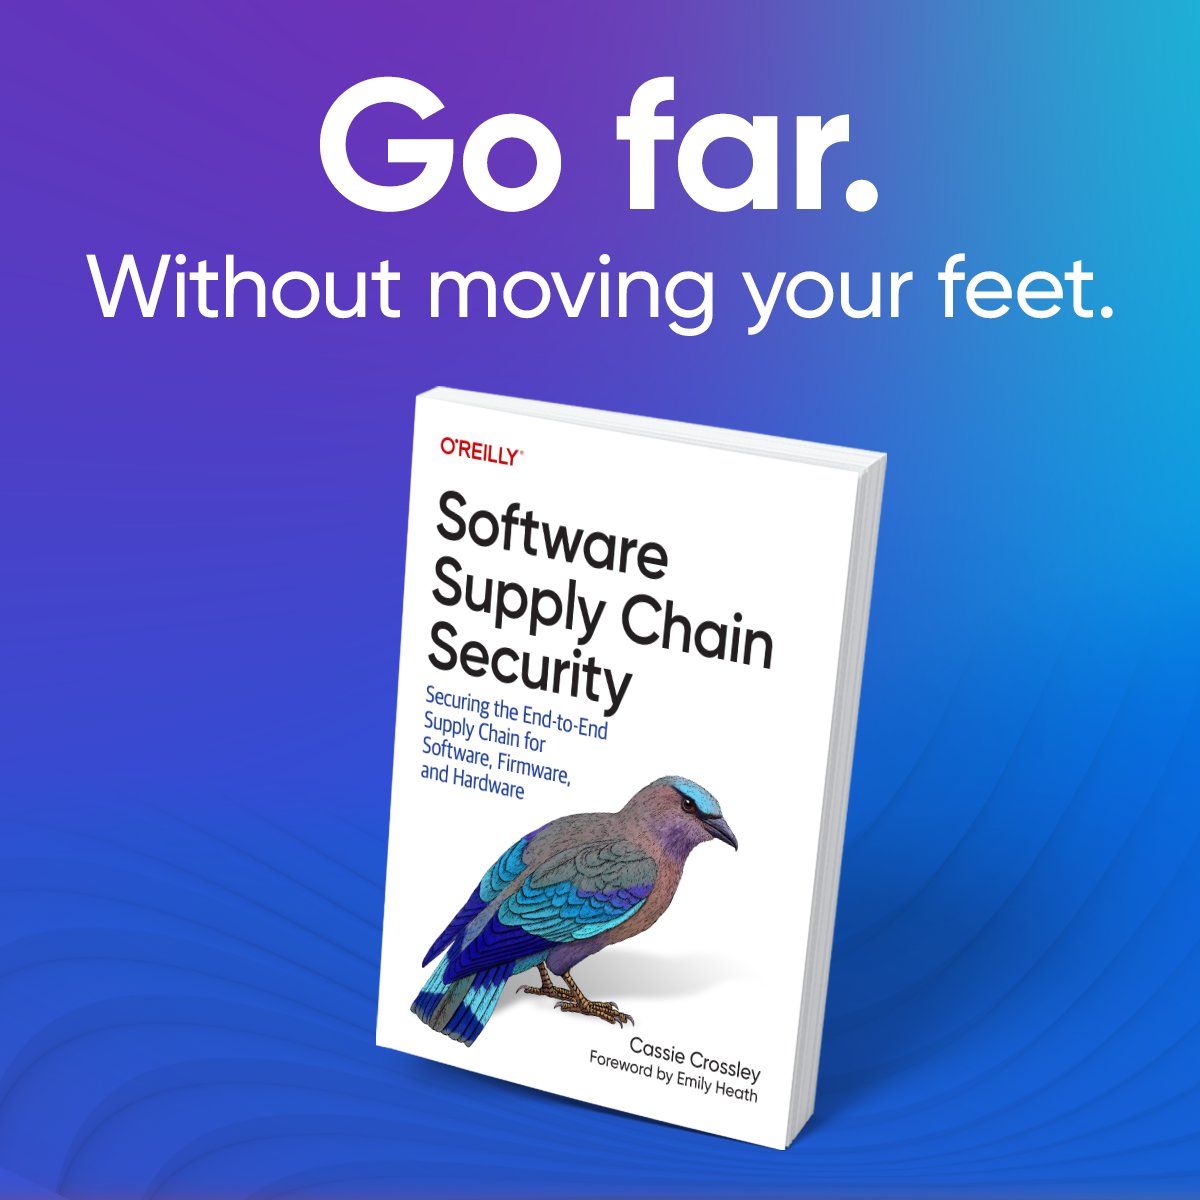 Author @Cassie_Crossley demonstrates how and why everyone involved in the supply chain needs to participate if your organization is to improve the security posture of its software, firmware, and hardware. oreil.ly/m3nRG